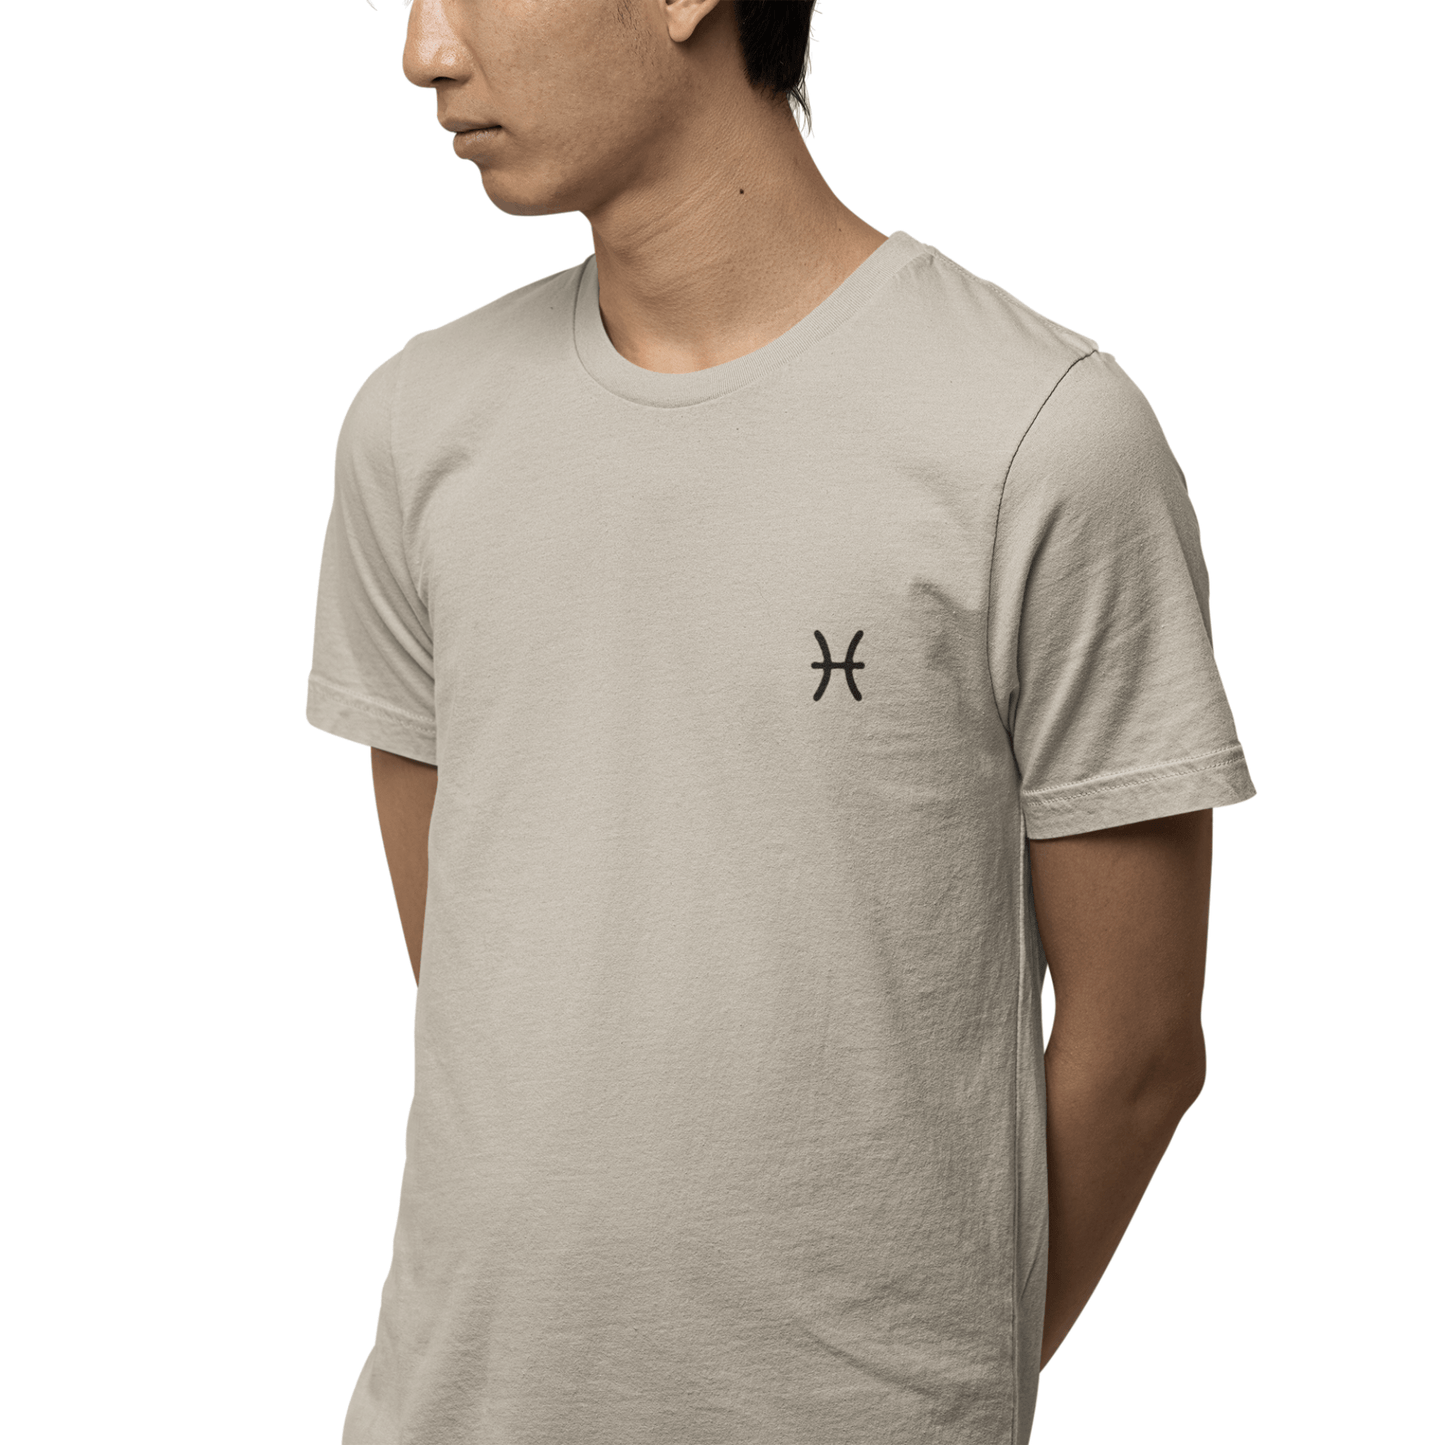 T-Shirt Pisces Fish Silhouette T-Shirt: Dreamy Comfort for the Compassionate Soul